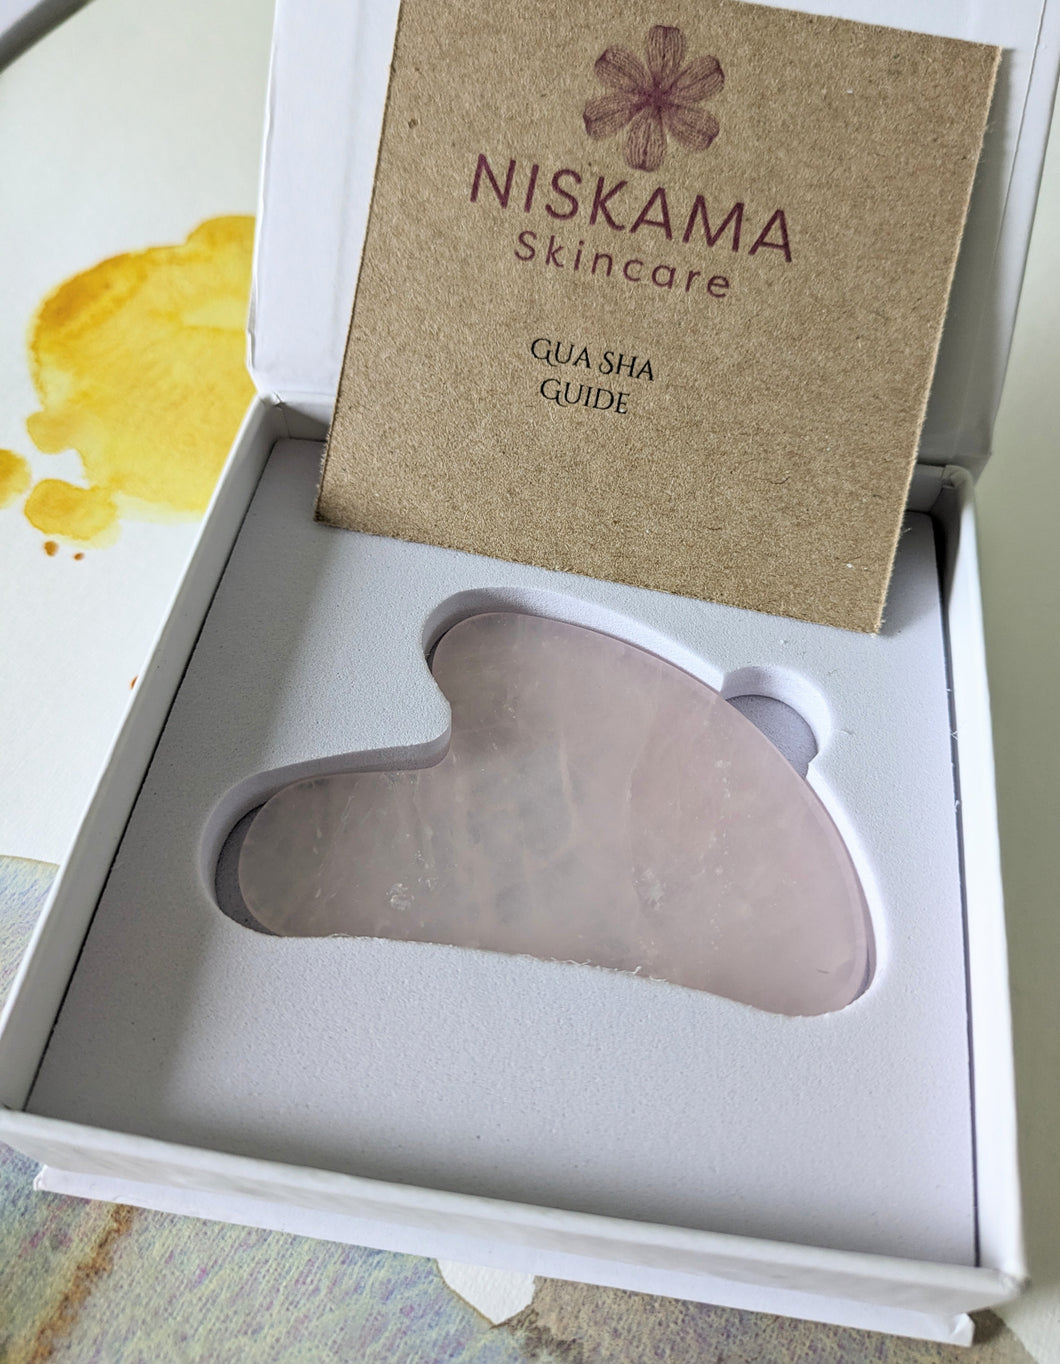 GUA SHA massage tool for home SELF CARE practice